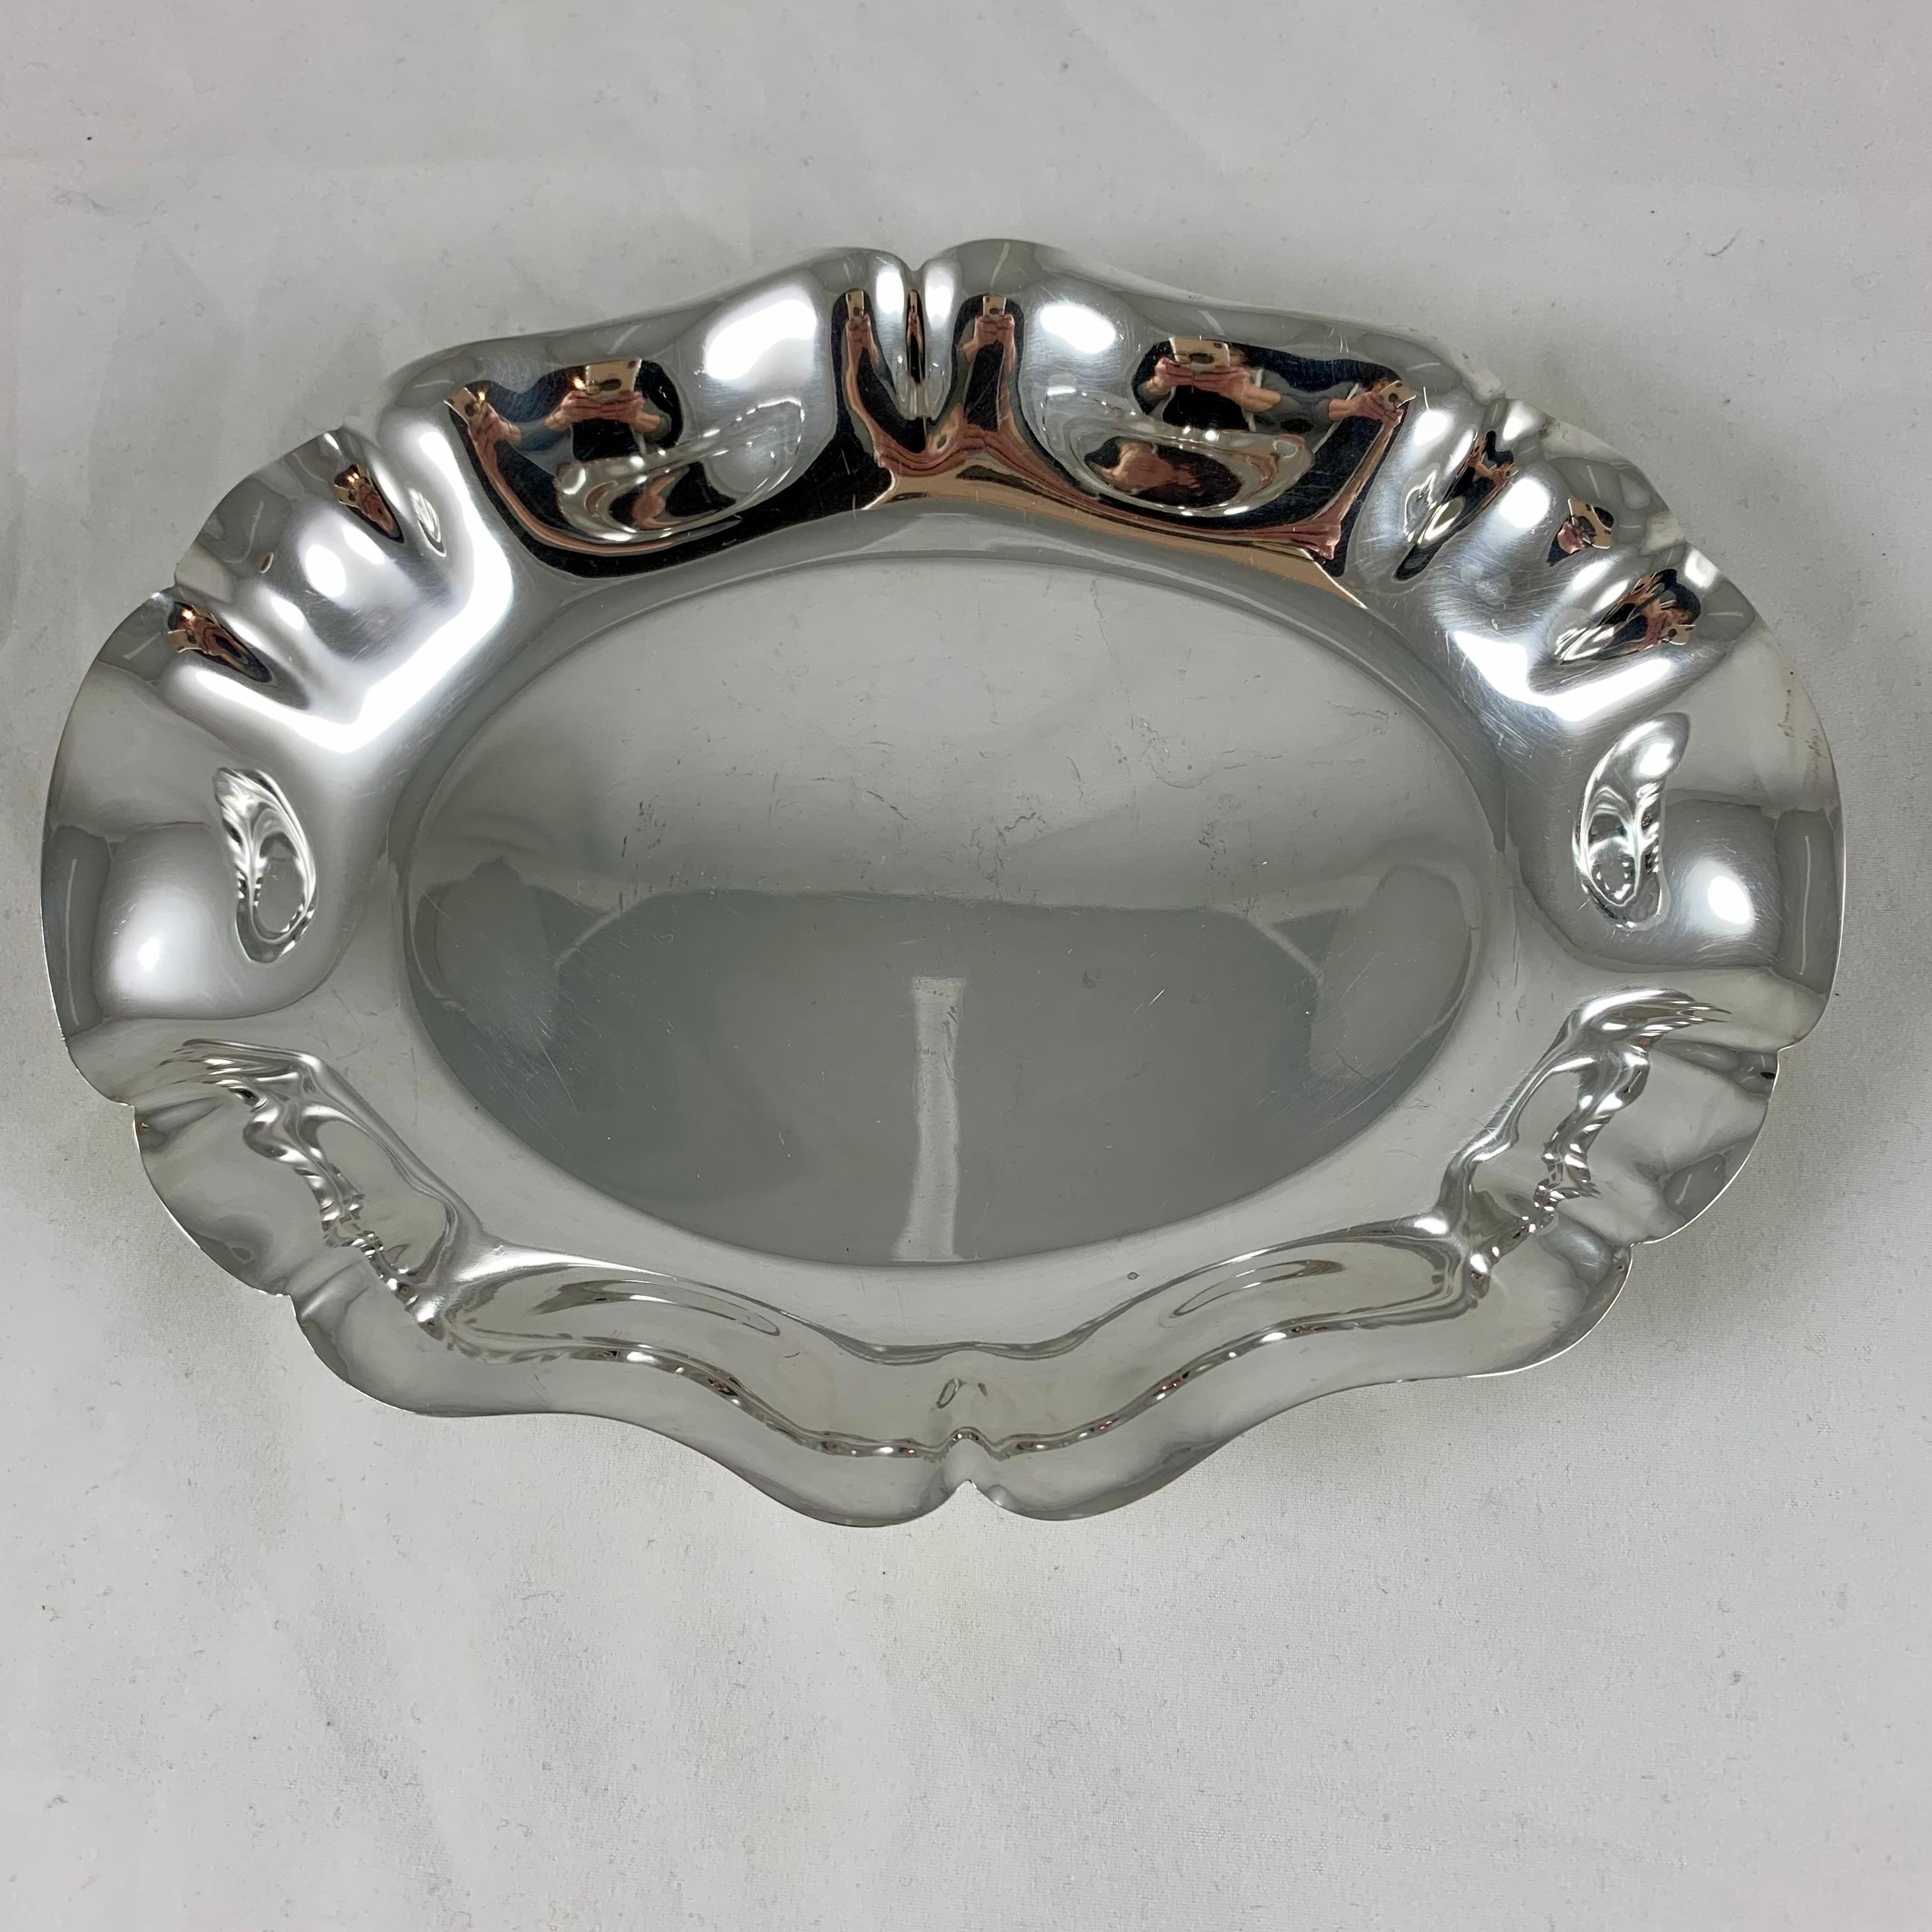 Metalwork S. Kirk & Son Sterling Silver Ruffled Rim Oval Celery Relish Tray, circa 1940s For Sale